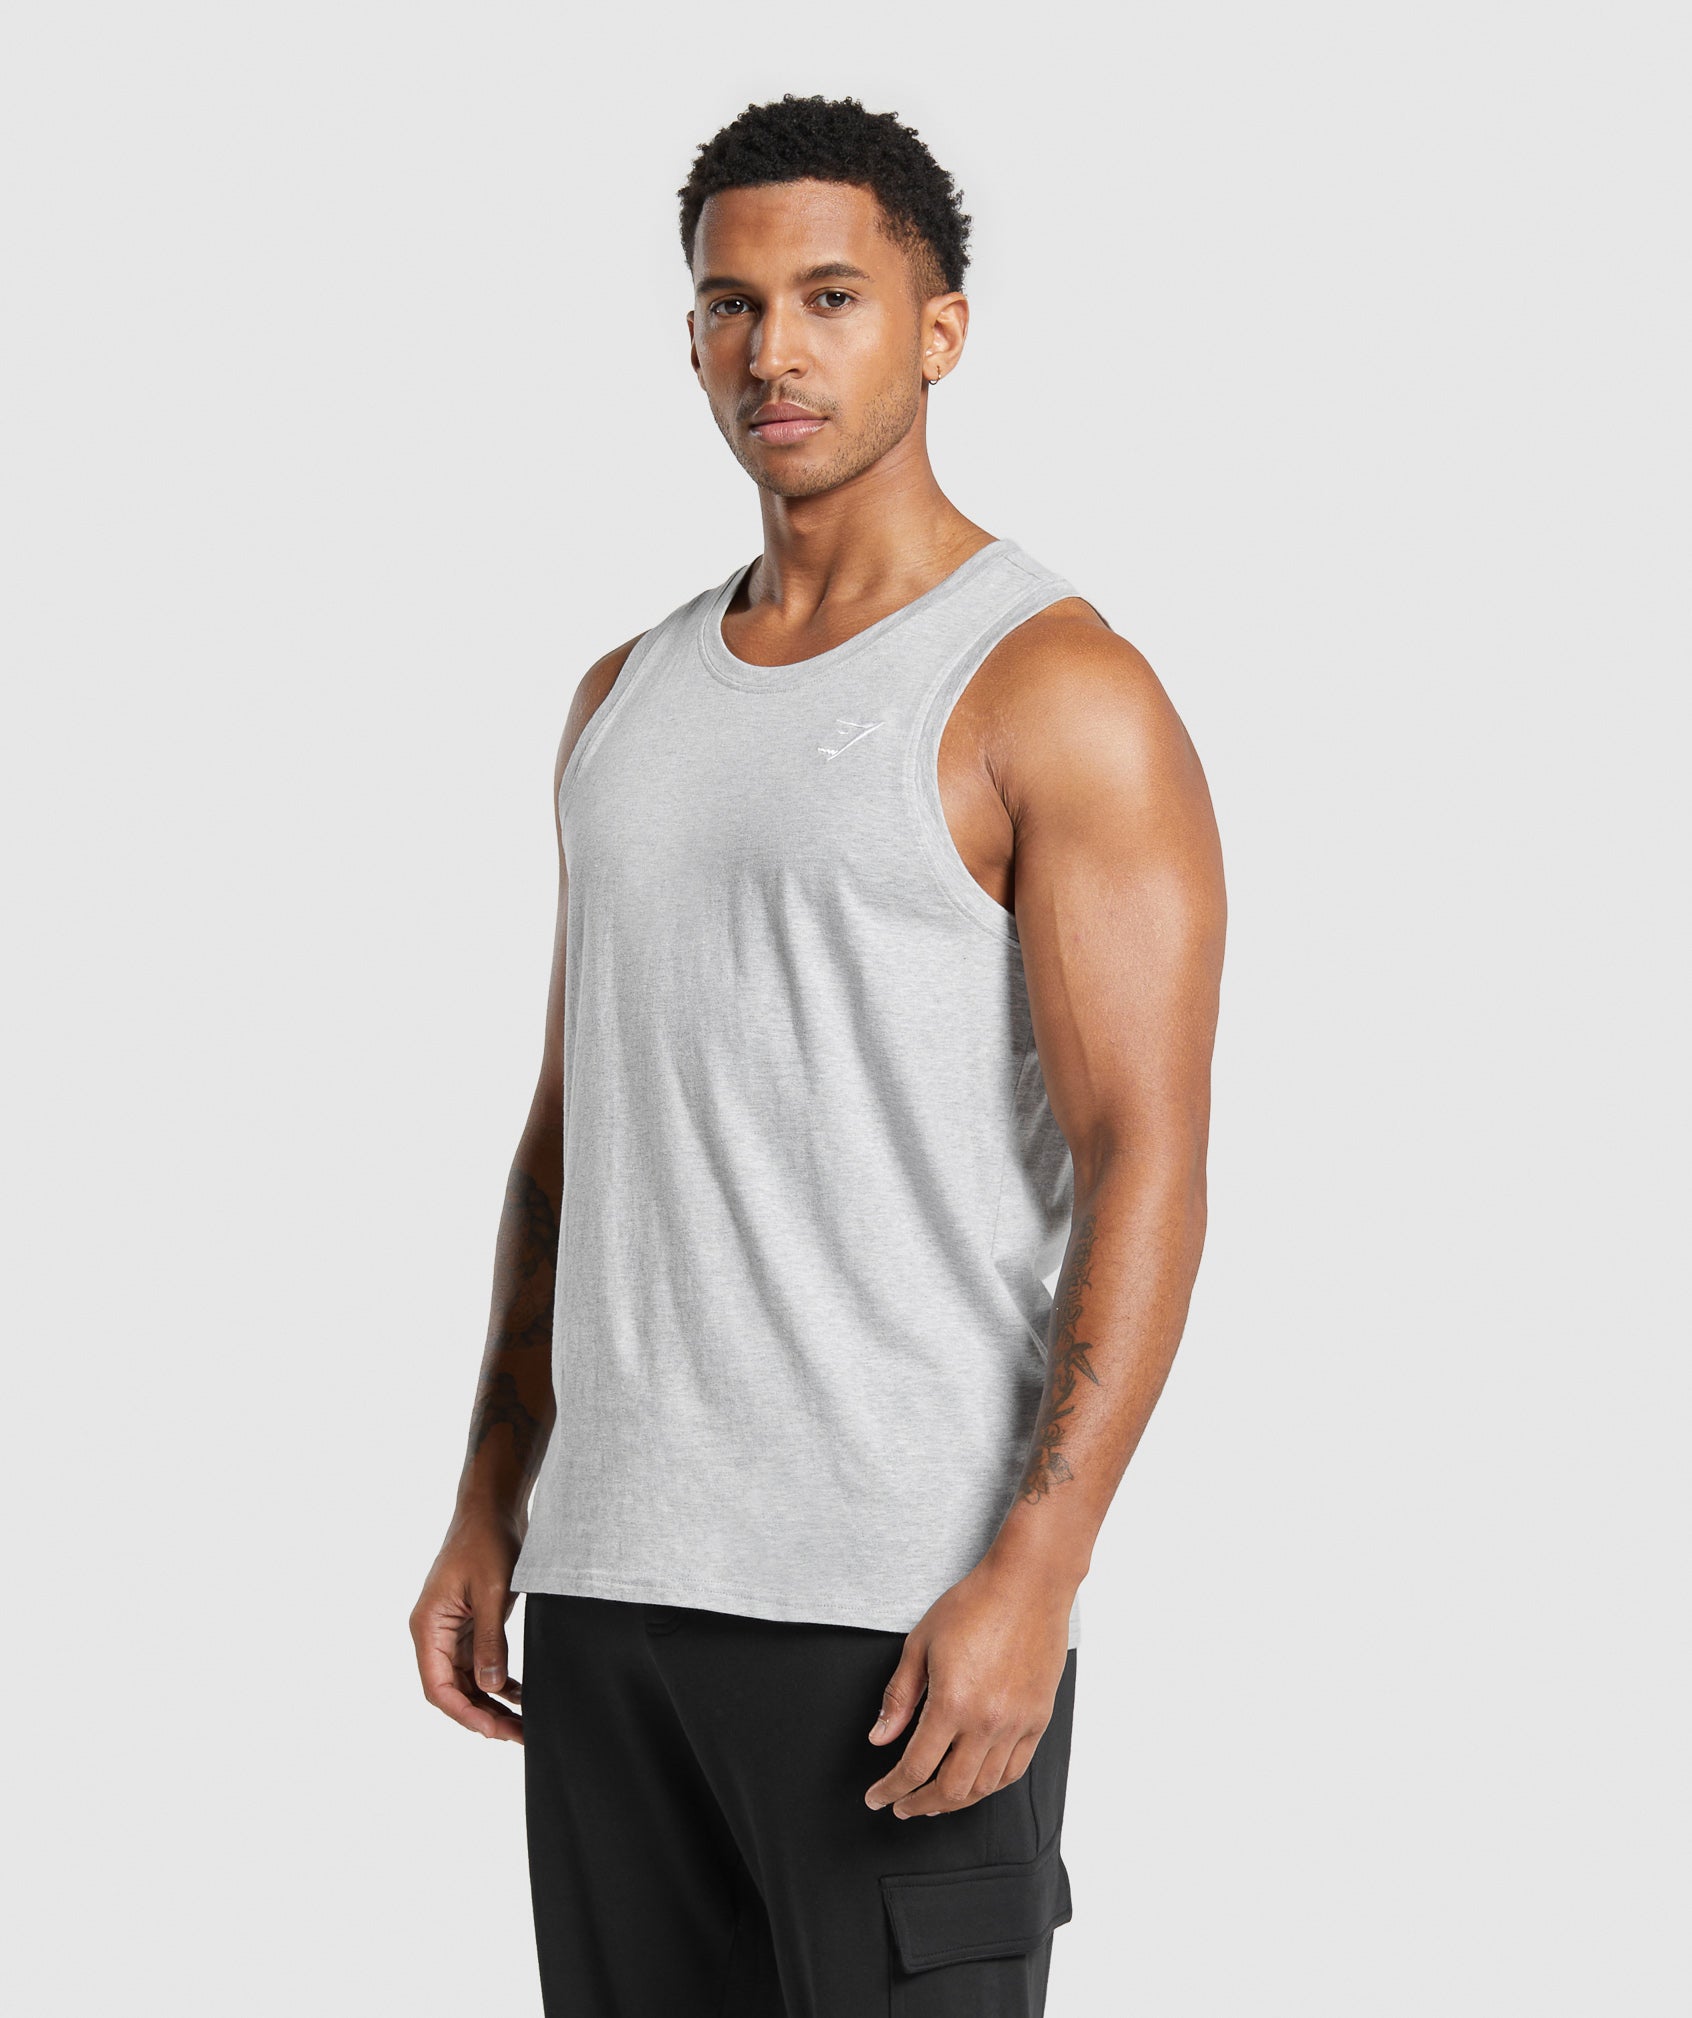 Crest Tank in Light Grey Core Marl - view 3